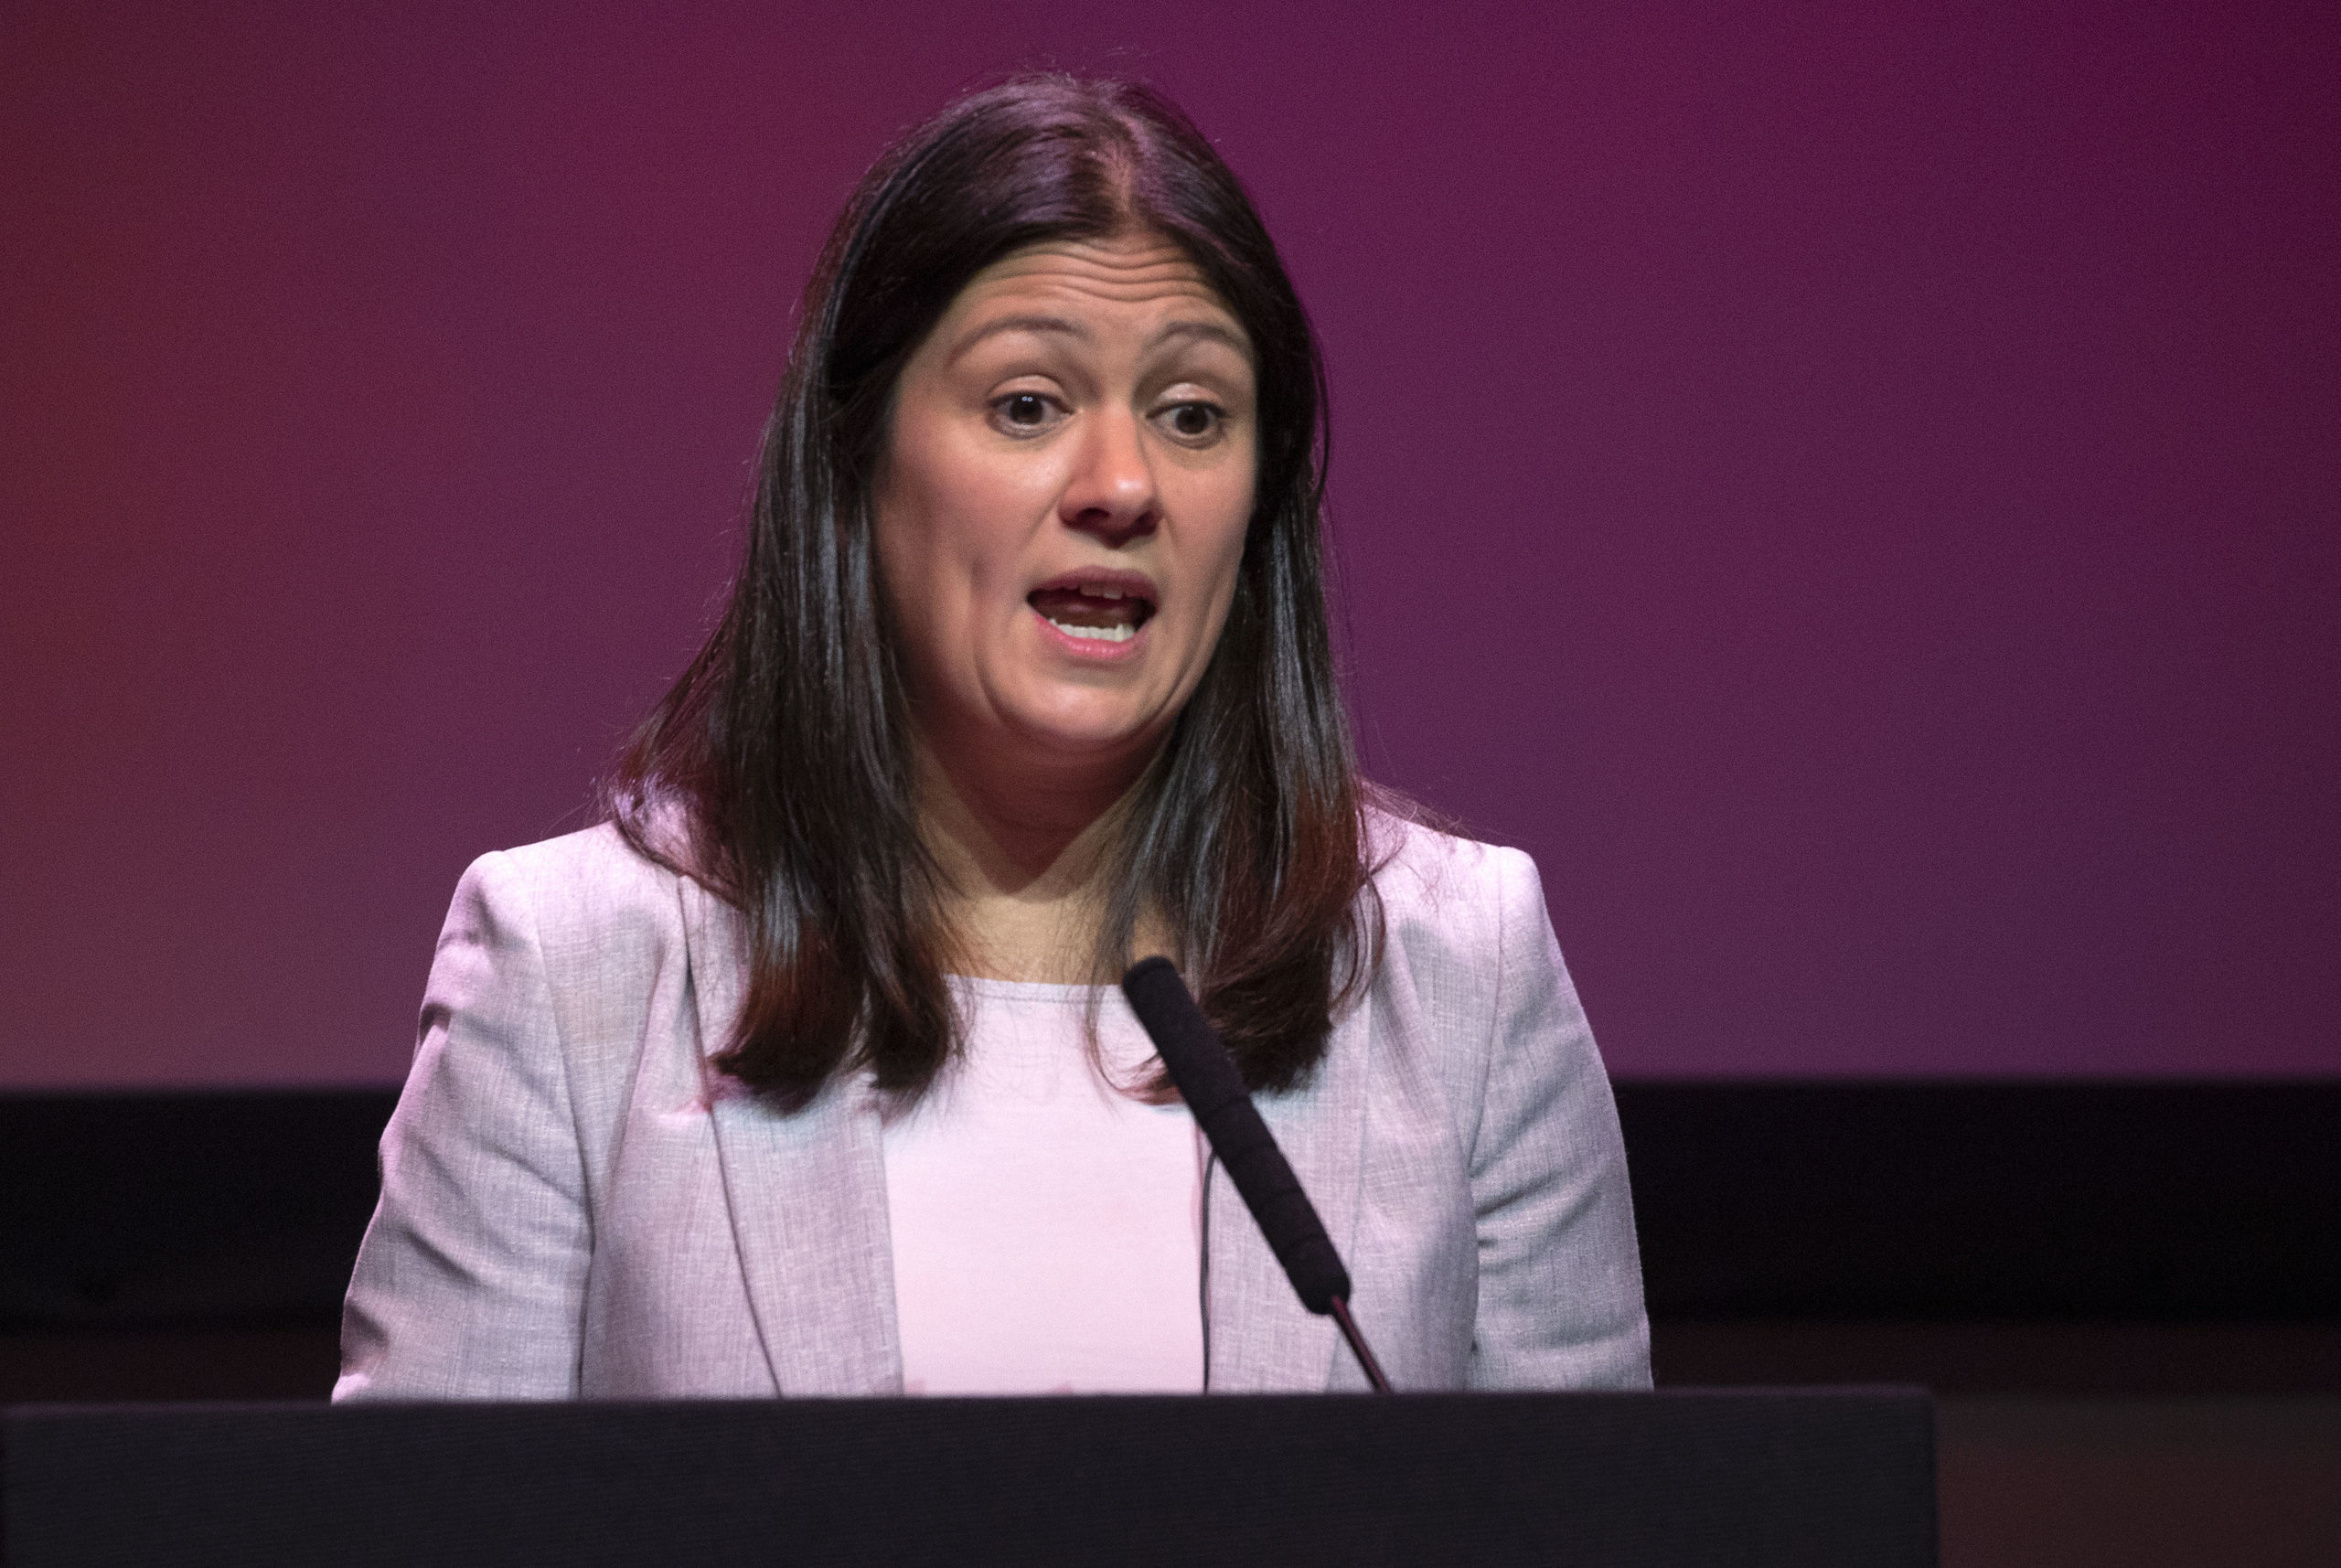 All Women Mps Face Sexism Says Labour Leadership Hopeful Lisa Nandy 5281